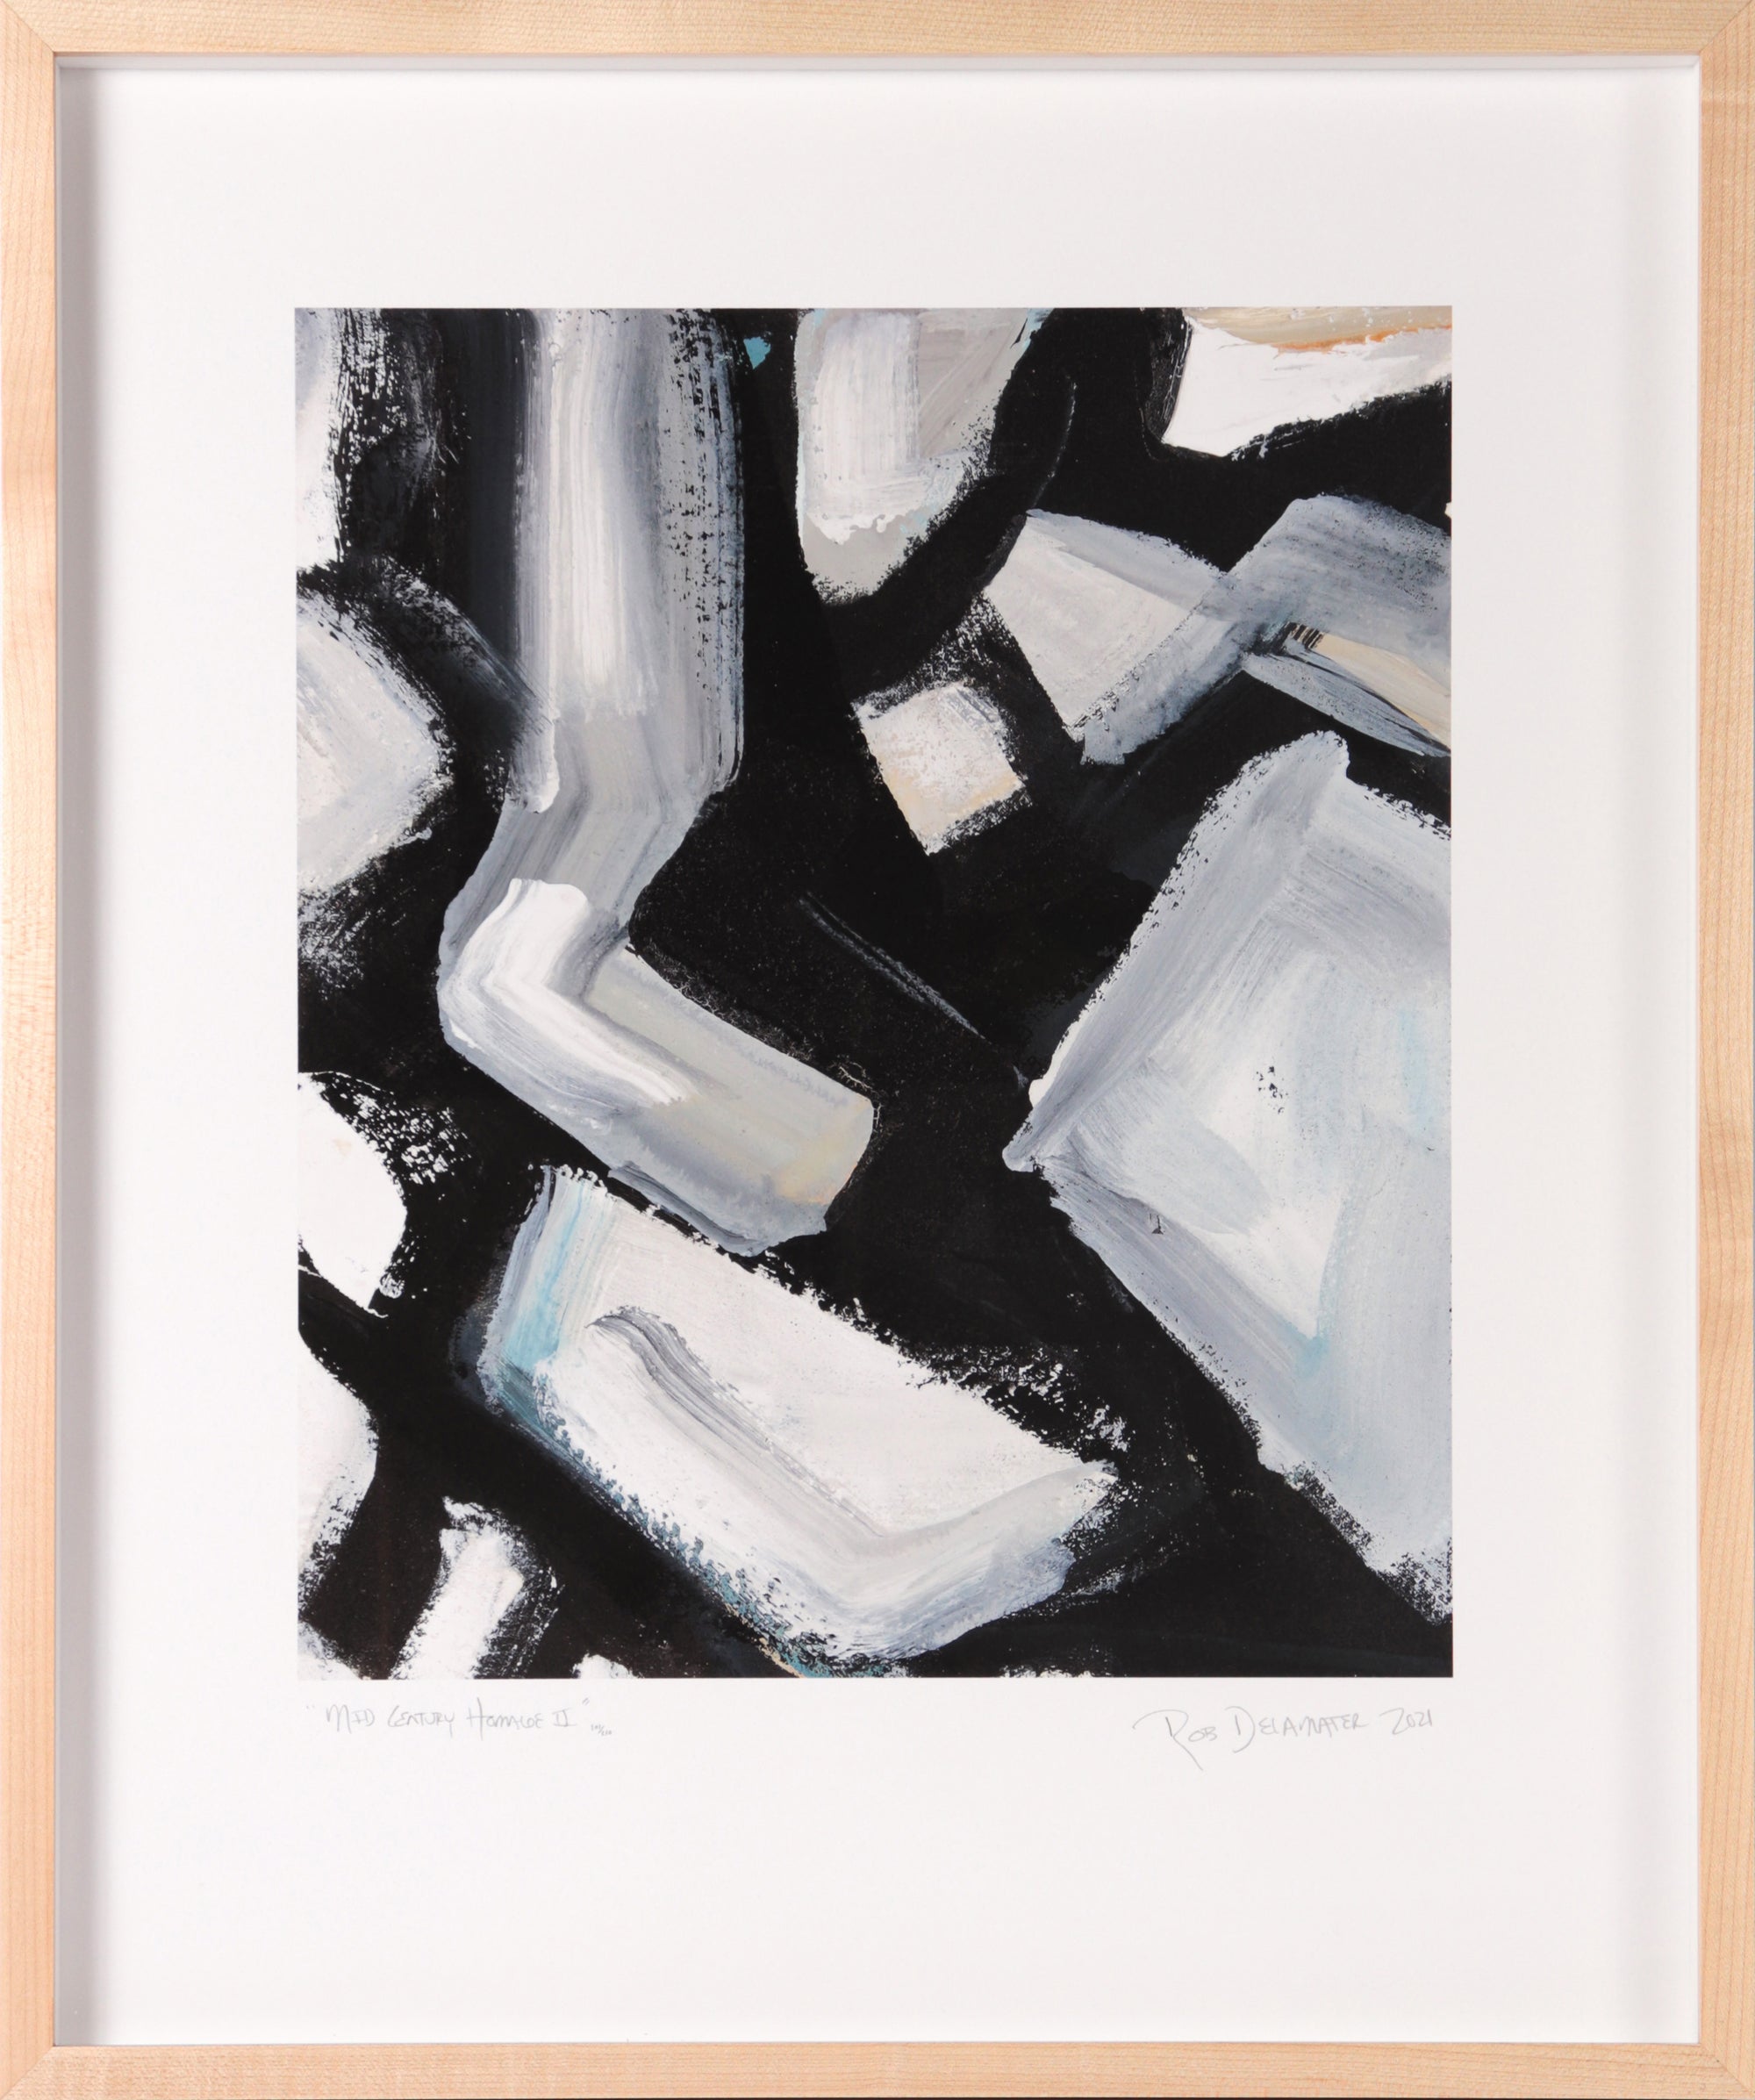 <i>Mid Century Homage II</i> <br>Limited Edition Archival Print <br><br>ART-22855